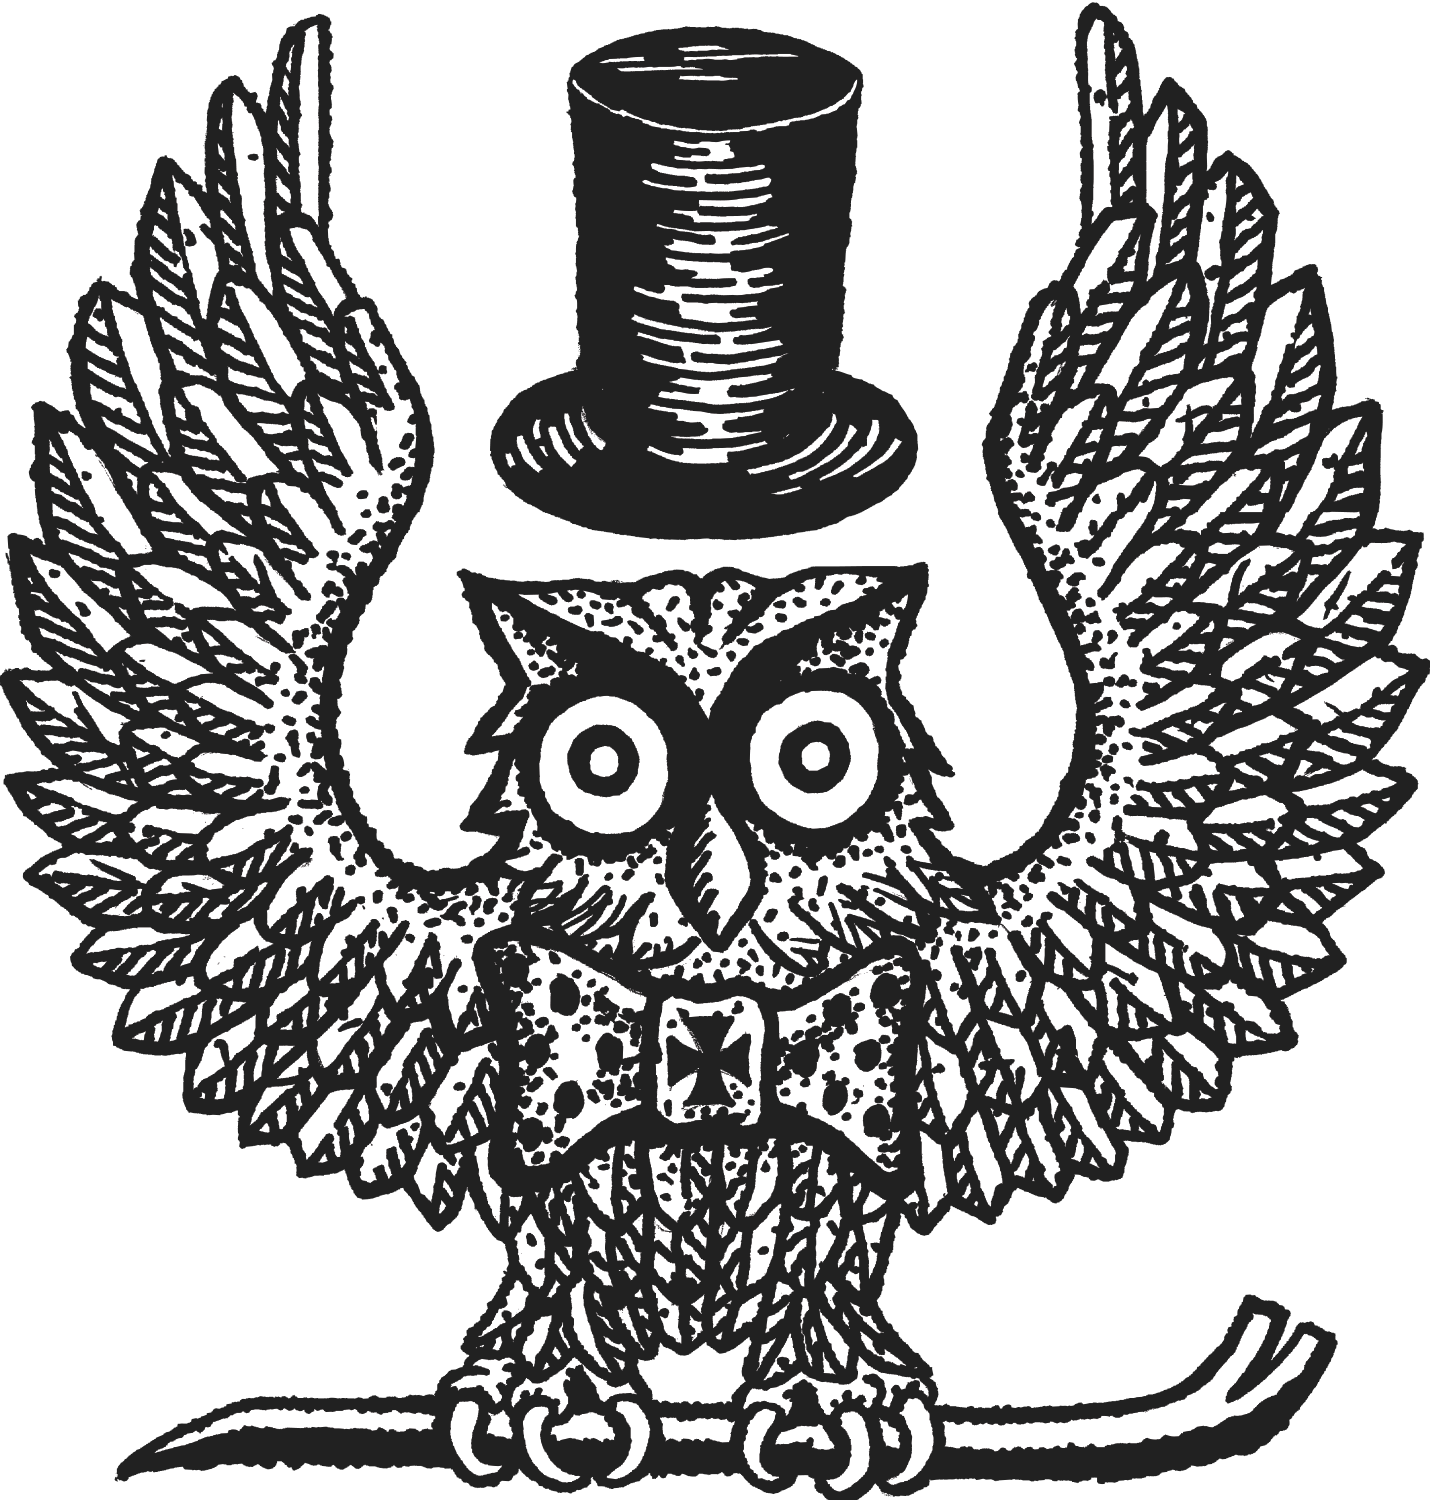 Russian Prison Owl Tattoo Design In - Meanings Russian Prison Tattoos (1430x1500)